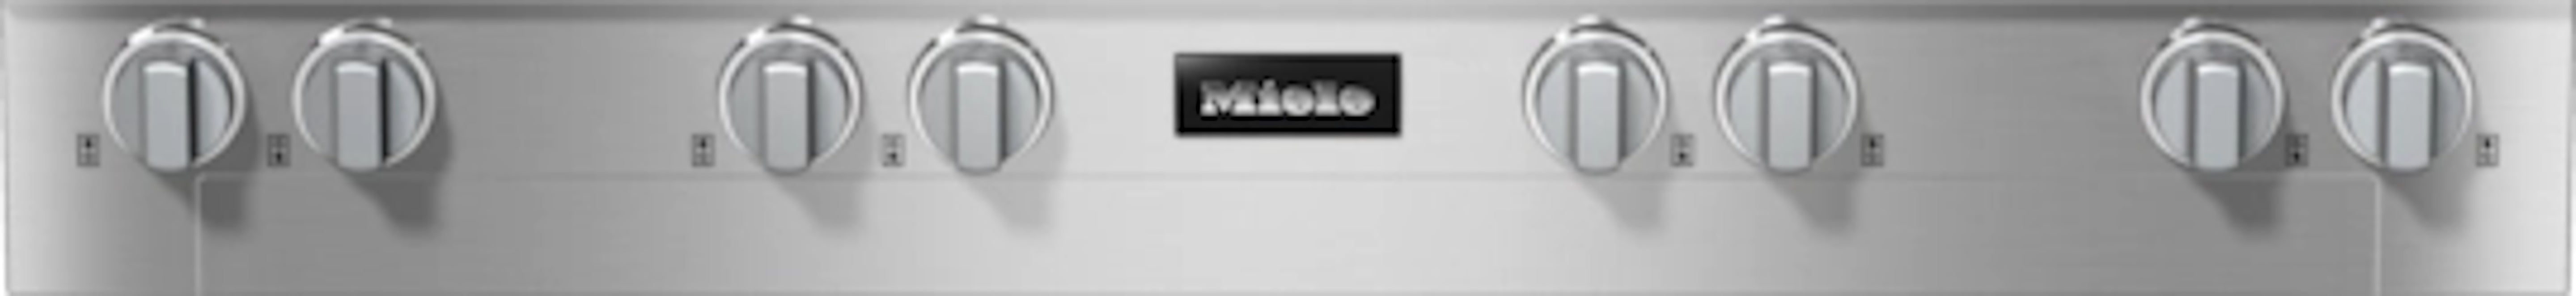 Miele - 48 Inch Gas Cooktop in Stainless - KMR 1354-3 LP